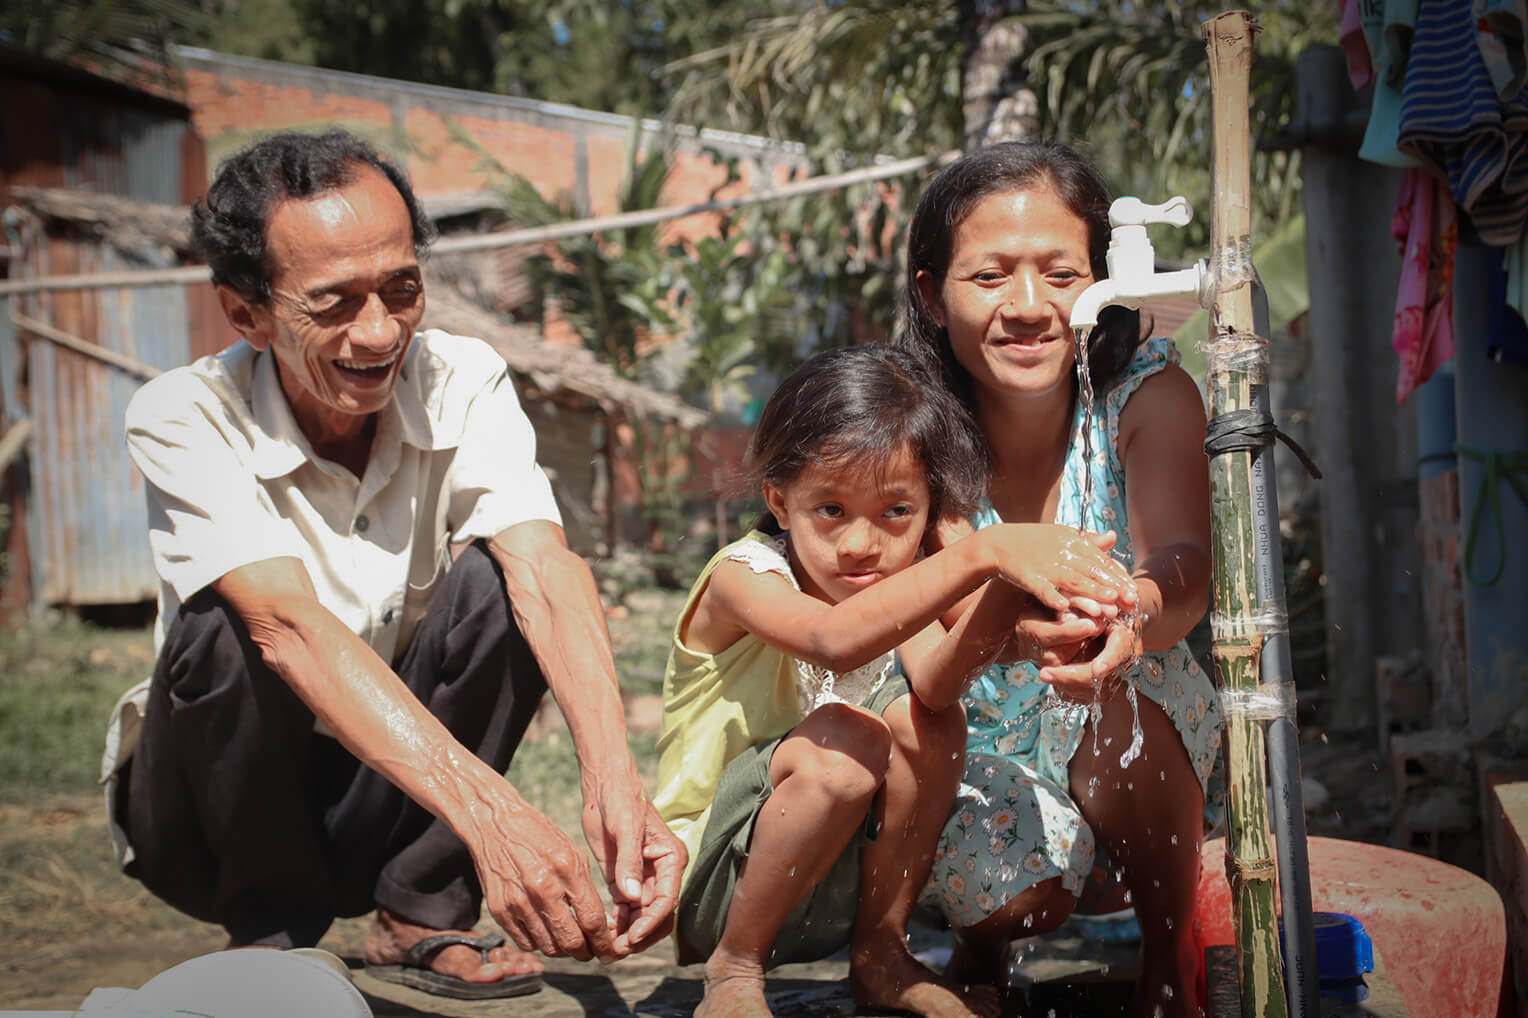 Cuong's family now have flowing water to use for drinking, cleaning, bathing, and cooking.